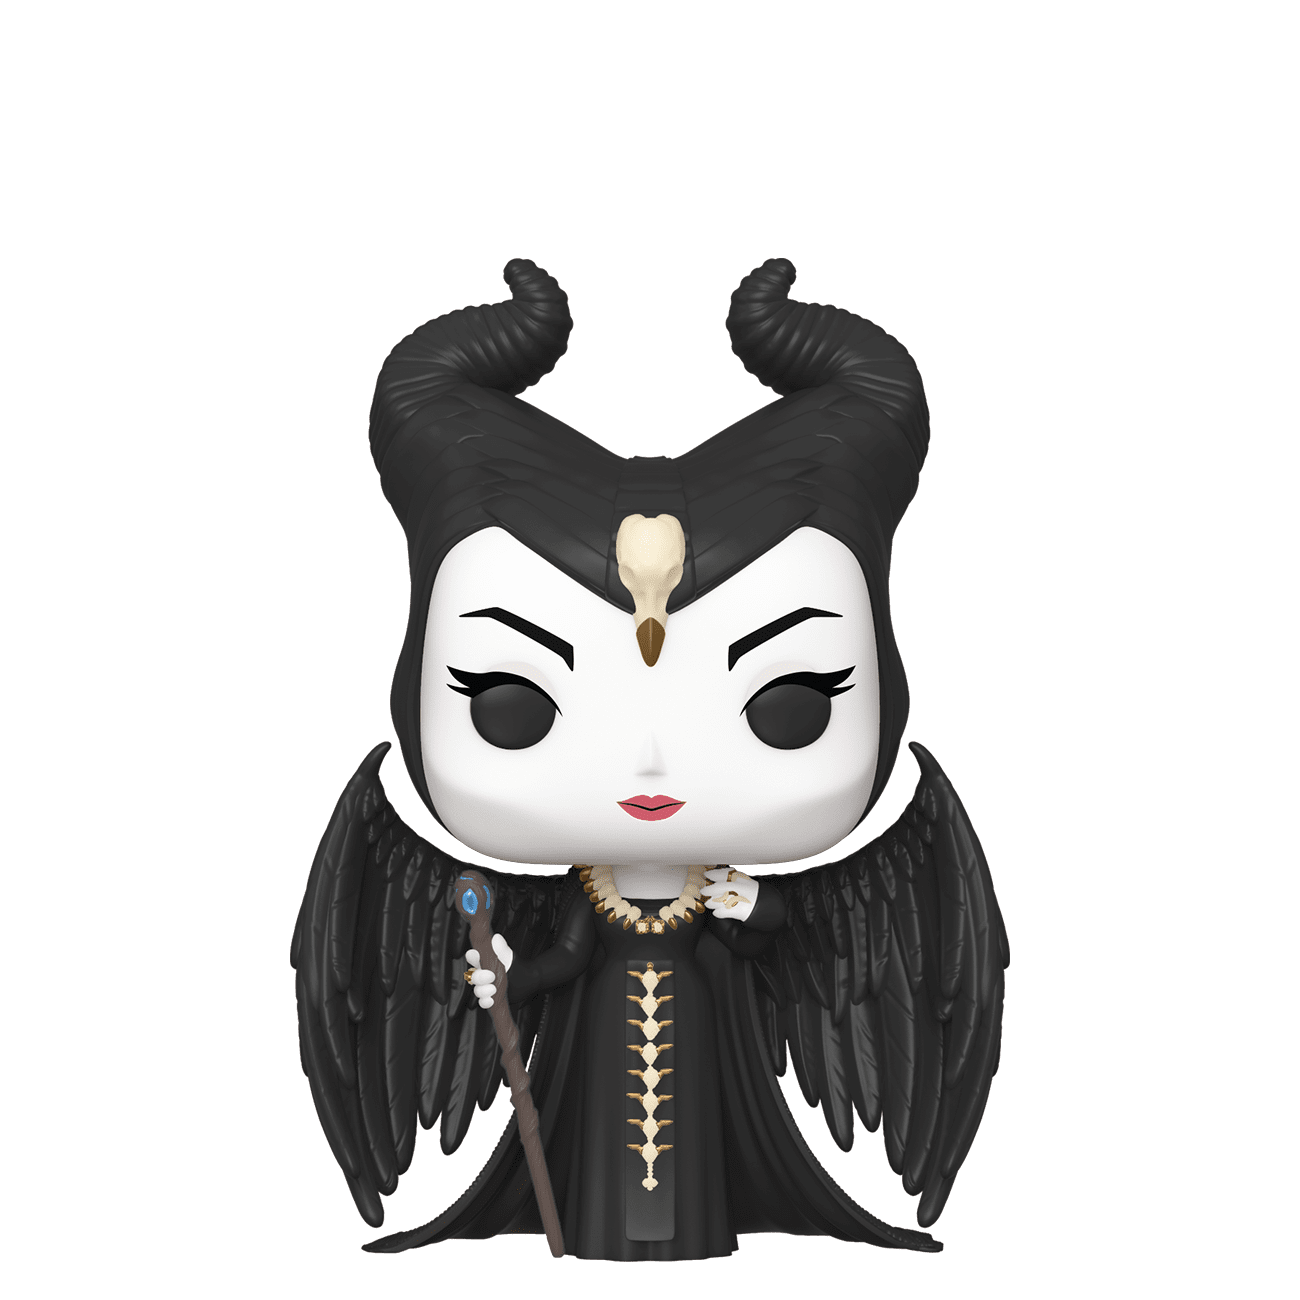 Wicked Maleficent Funko POP! Figure Inspired By The New Film